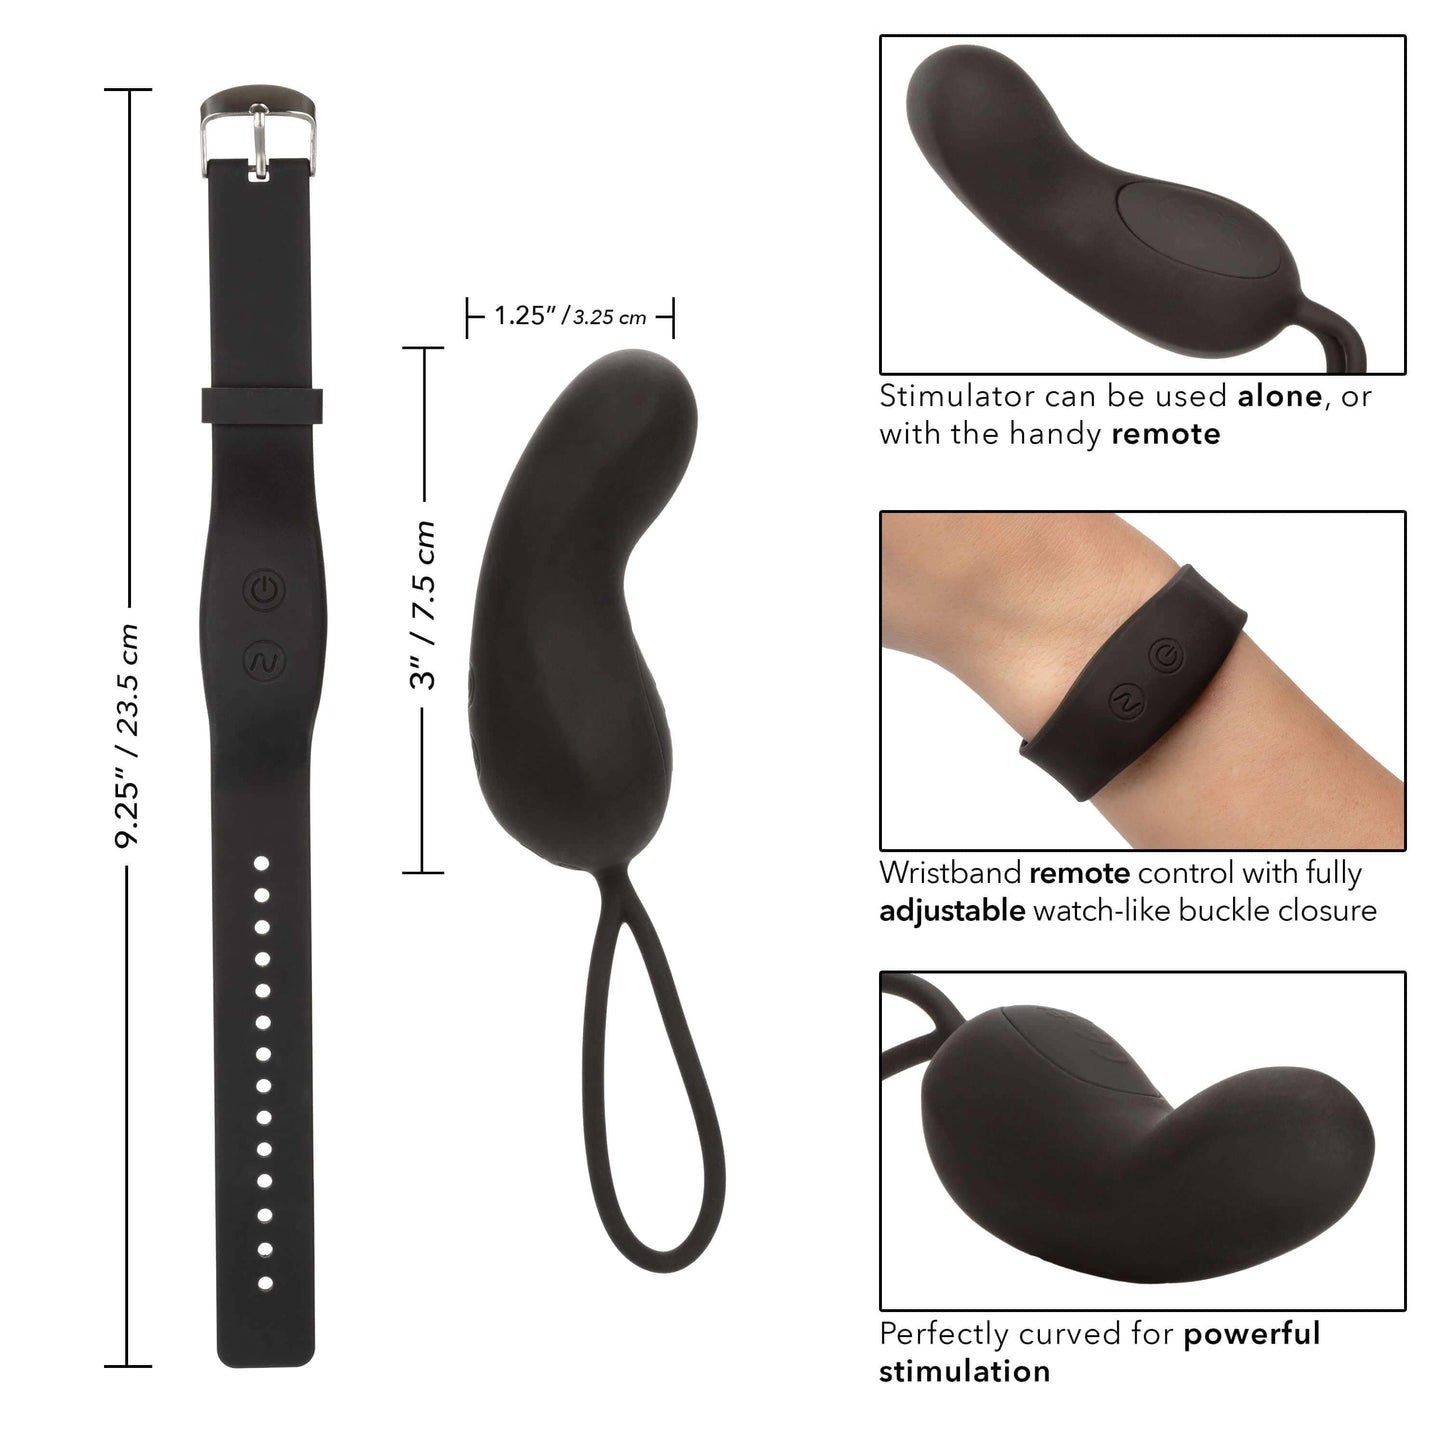 Wristband Remote Curve - Thorn & Feather Sex Toy Canada